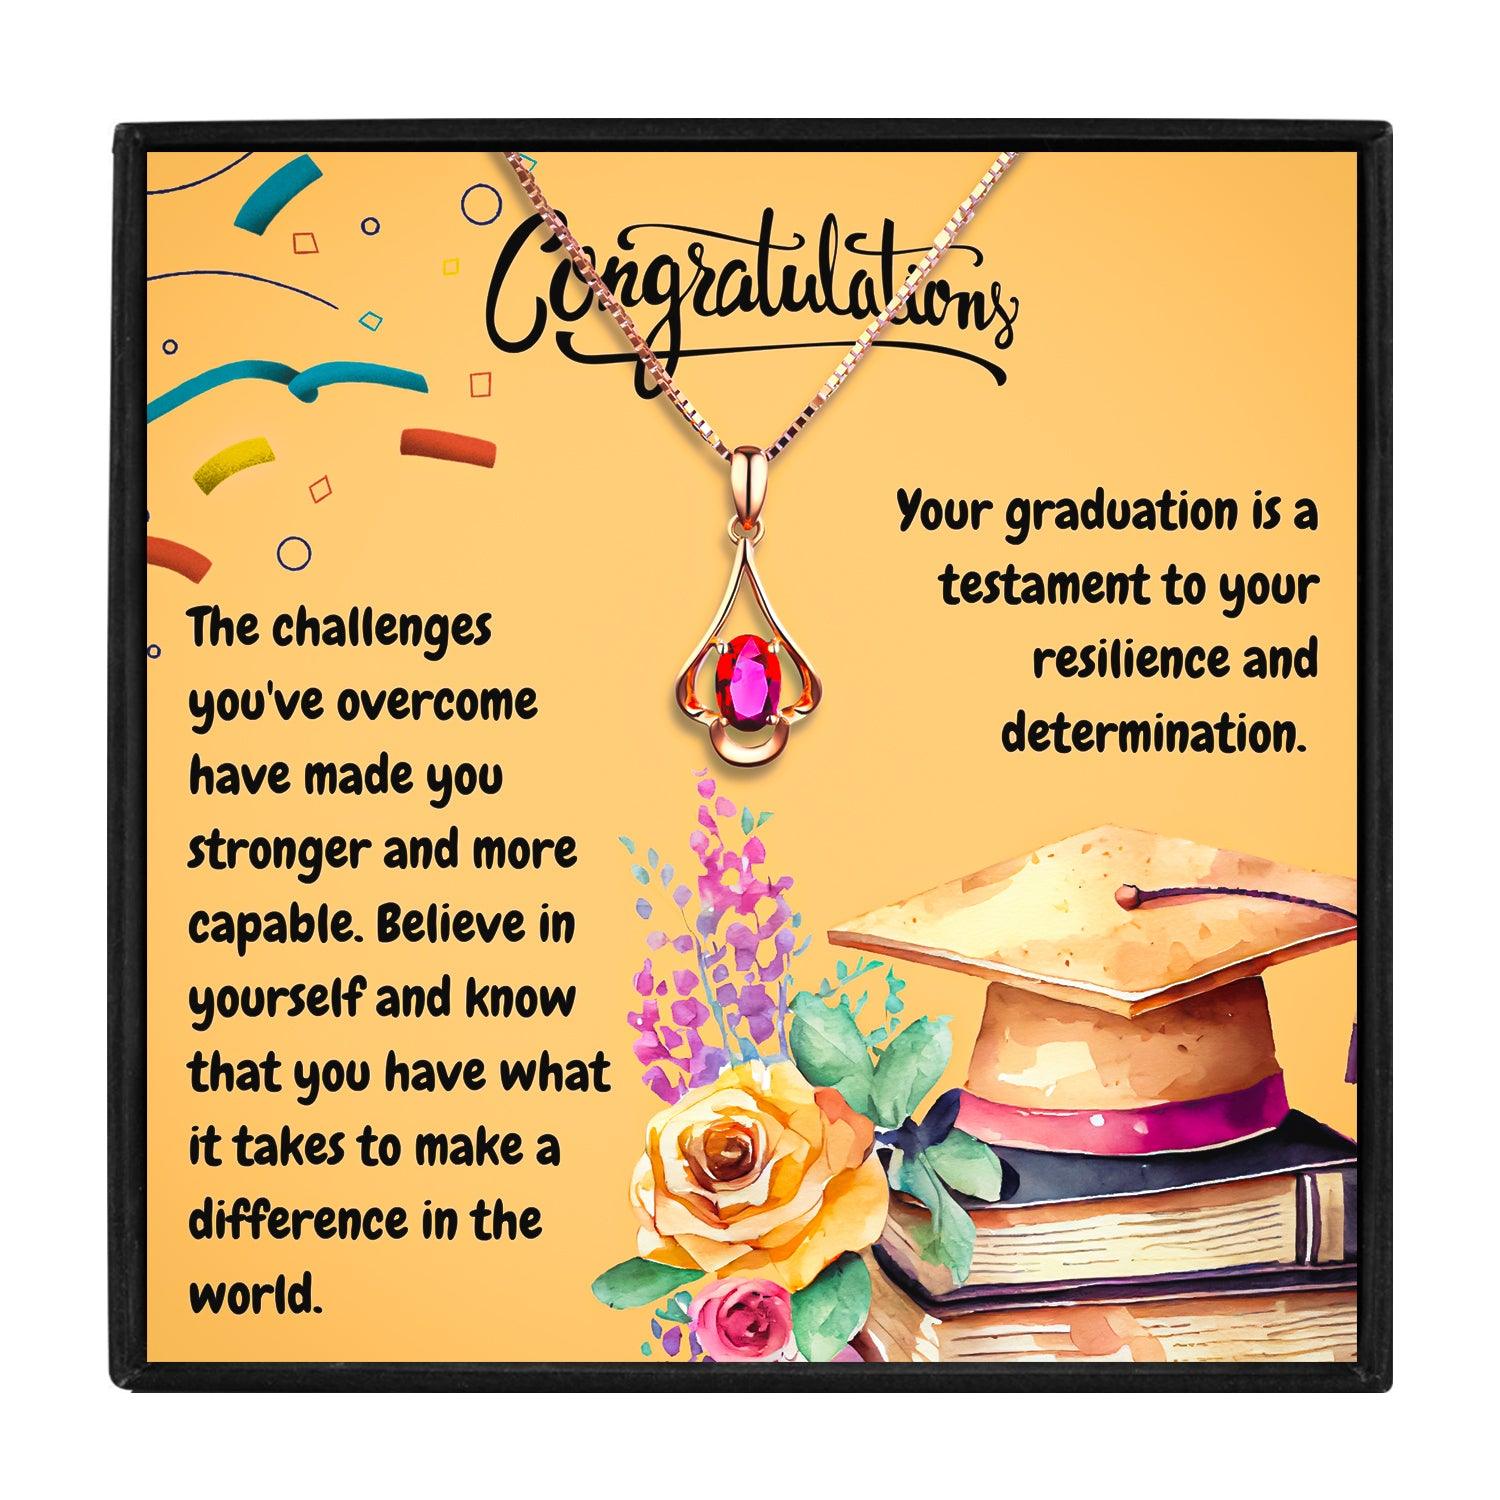 Graduation Charm Necklaces With Meaningful Message in 2023 | Graduation Charm Necklaces With Meaningful Message - undefined | graduation charm necklace, graduation flowers necklace, graduation necklace, graduation pendants | From Hunny Life | hunnylife.com